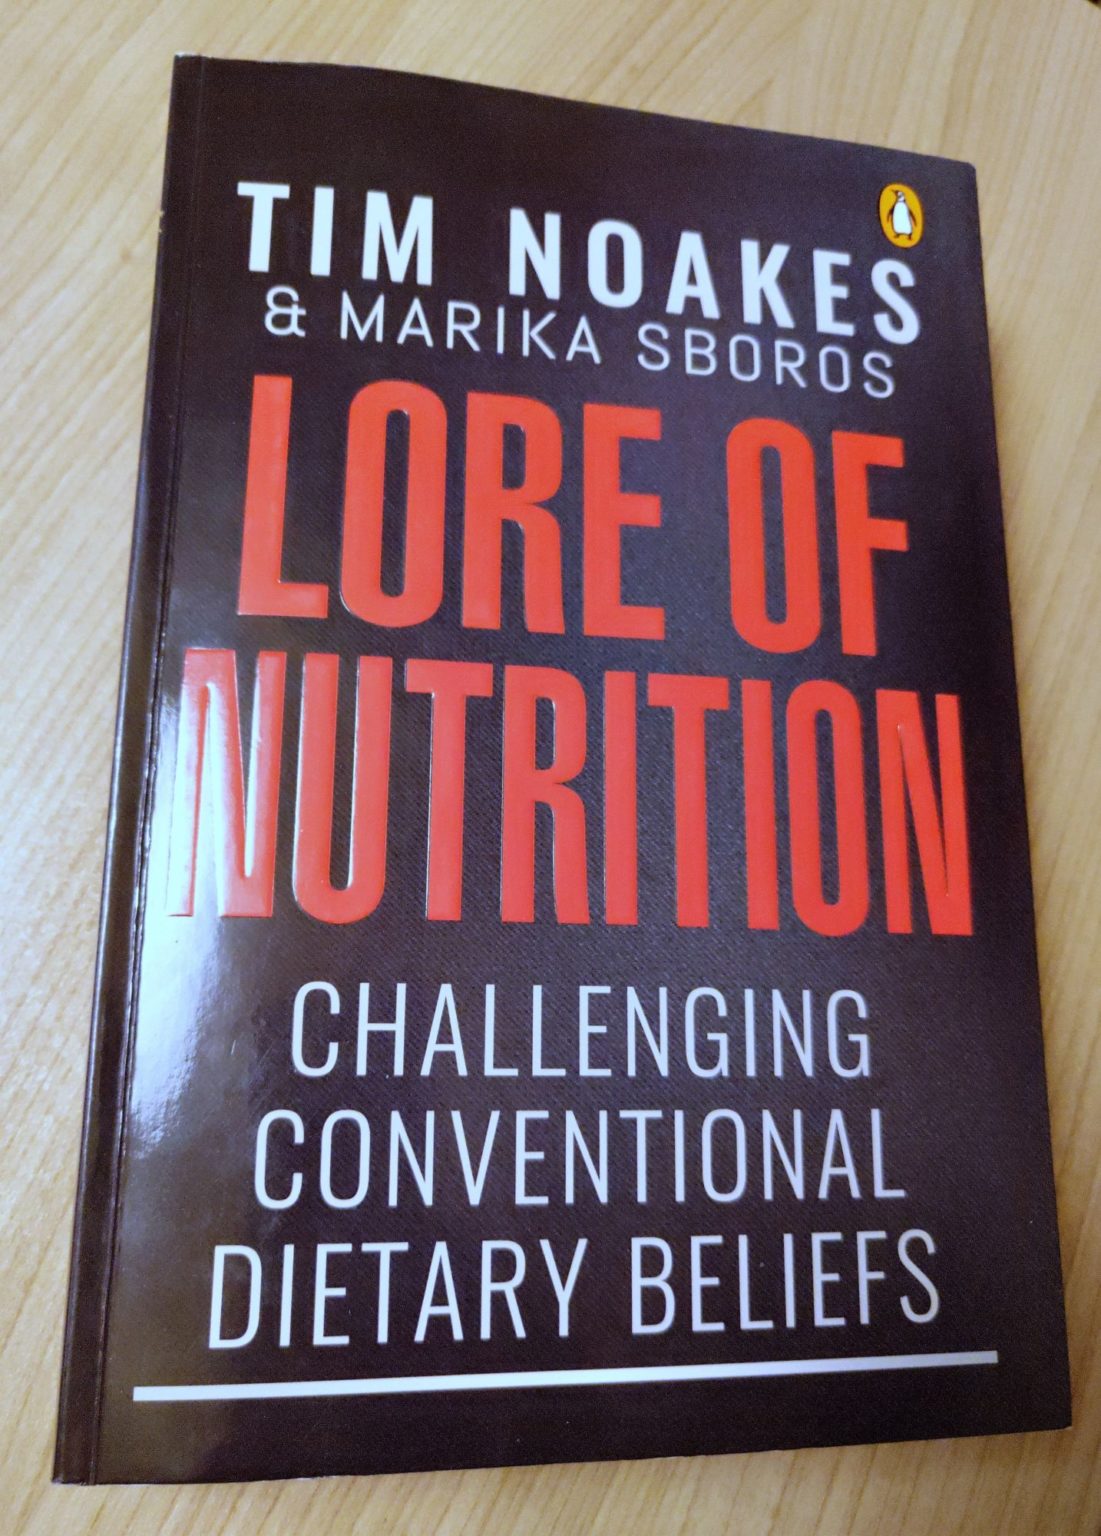 Lore of Nutrition